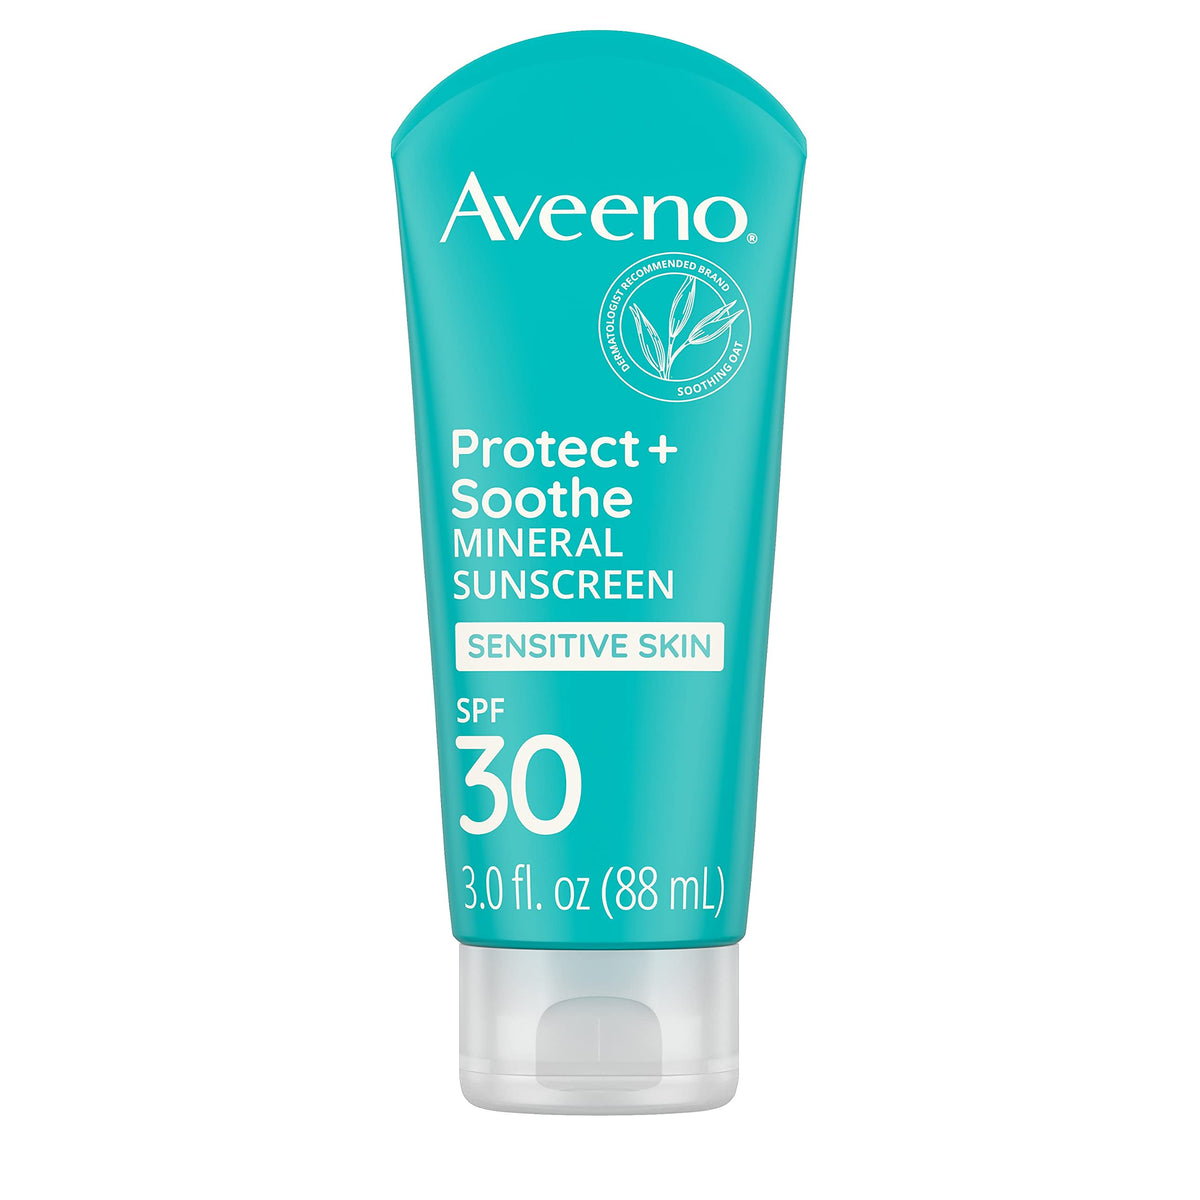 Aveeno Protect + Soothe Mineral Sunscreen Lotion with Broad Spectrum SPF 30, Quick Drying and Water-Resistant UVA/UVB Protection for Sensitive Skin, Fragrance-Free, 3.0 fl. oz